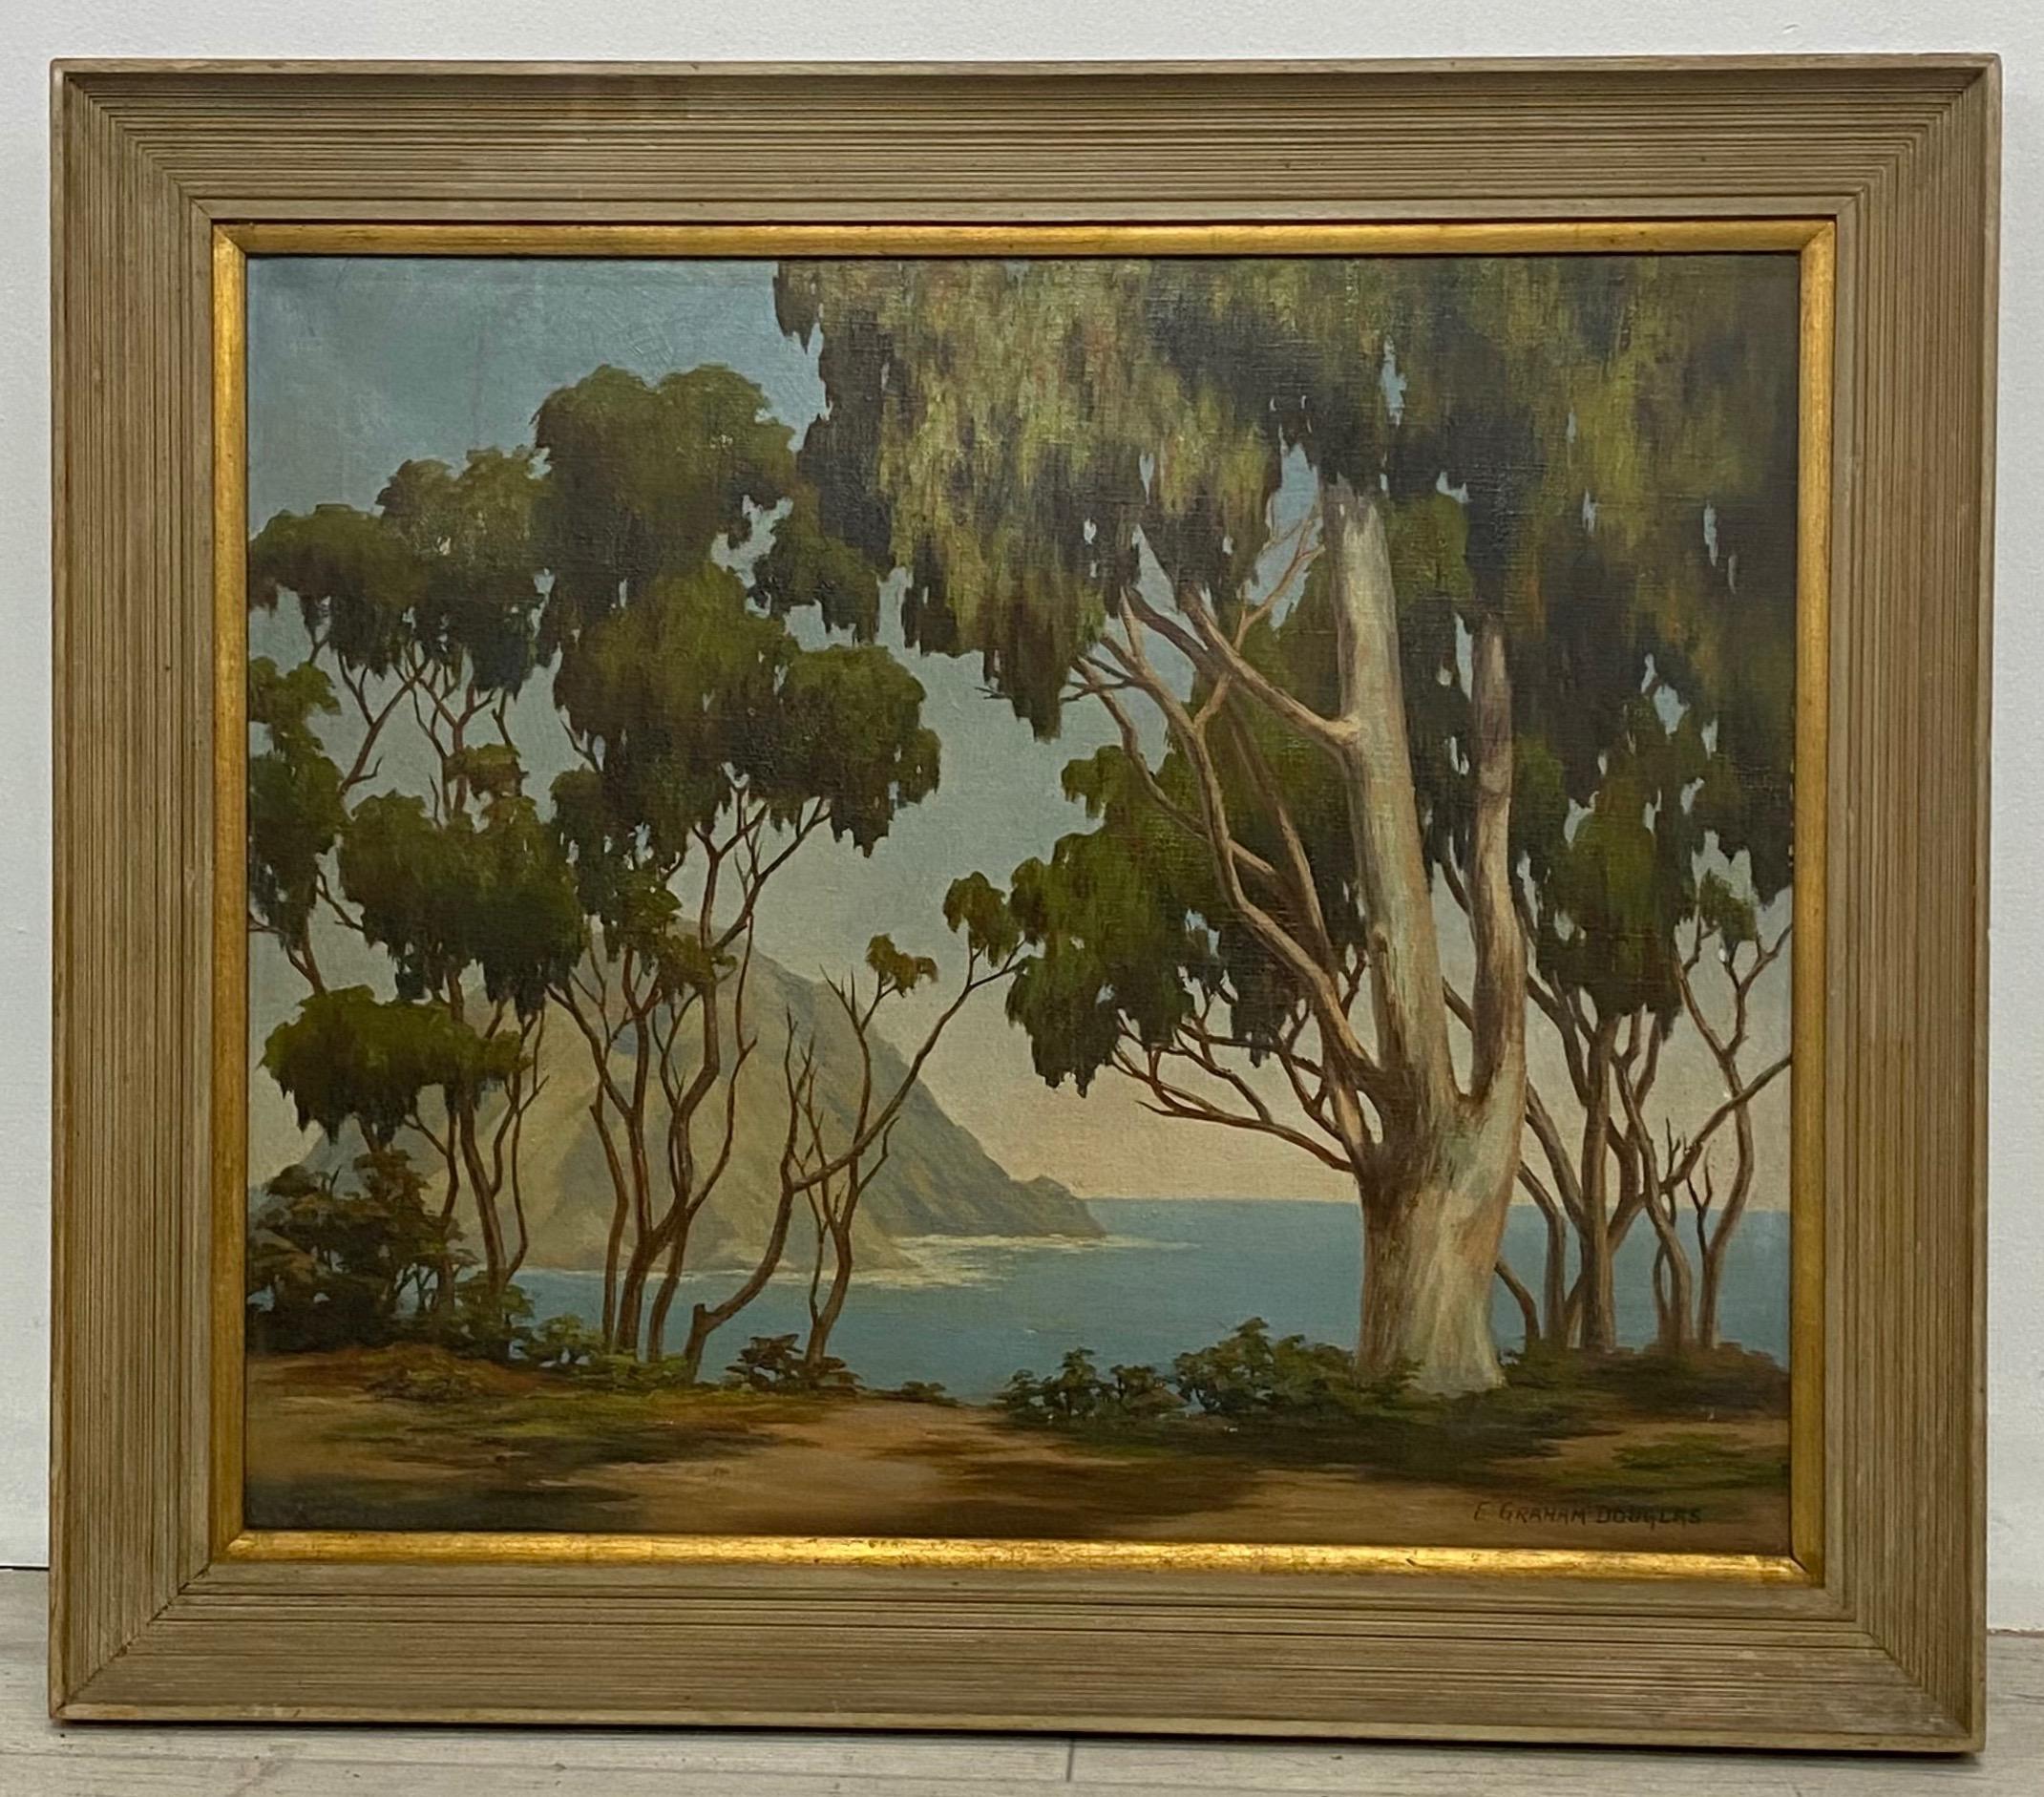 California landscape painting, oil on canvas in original frame.
Signed E. Graham Douglas, and Titled 'Morro Bay' .
American, mid 20th century, 1930's-1940's

Earl Graham Douglas (1879 - 1954) was active/lived in California, Indiana. Earl Douglas is